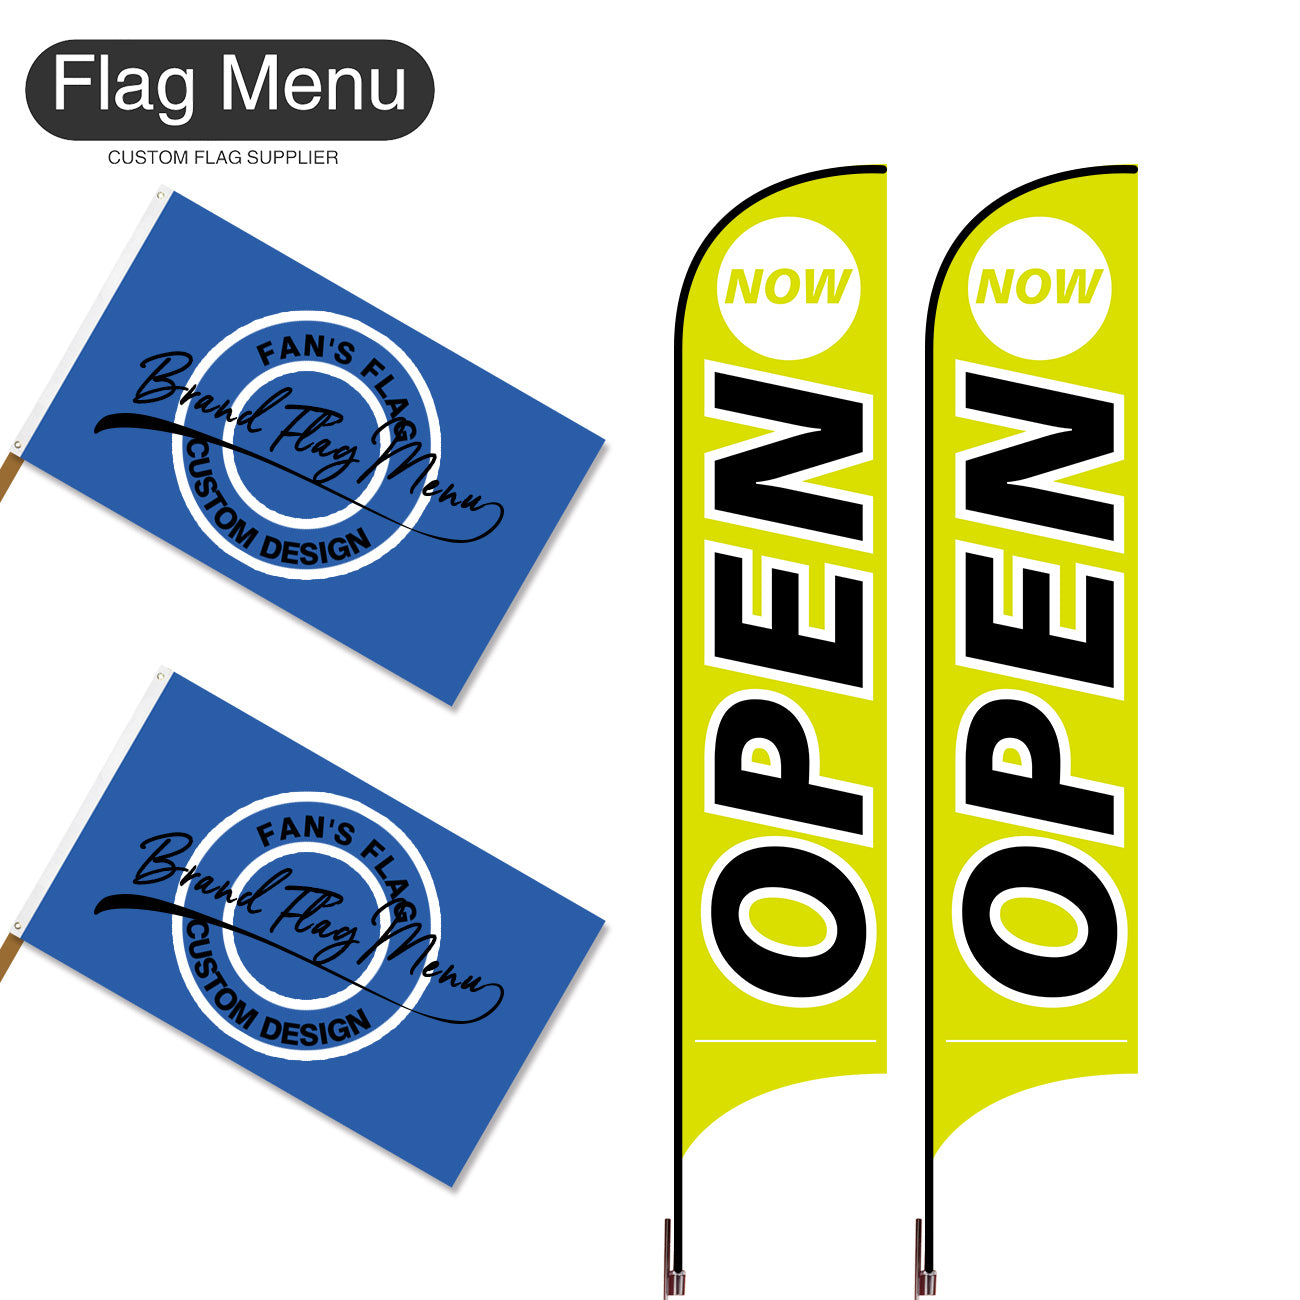 Outdoor Advertising Set - B-Green A-S - Feather Flag -Double Sided & 3'x5' Regular Flag -Single Sided-Cross & Water Bag-Flag Menu